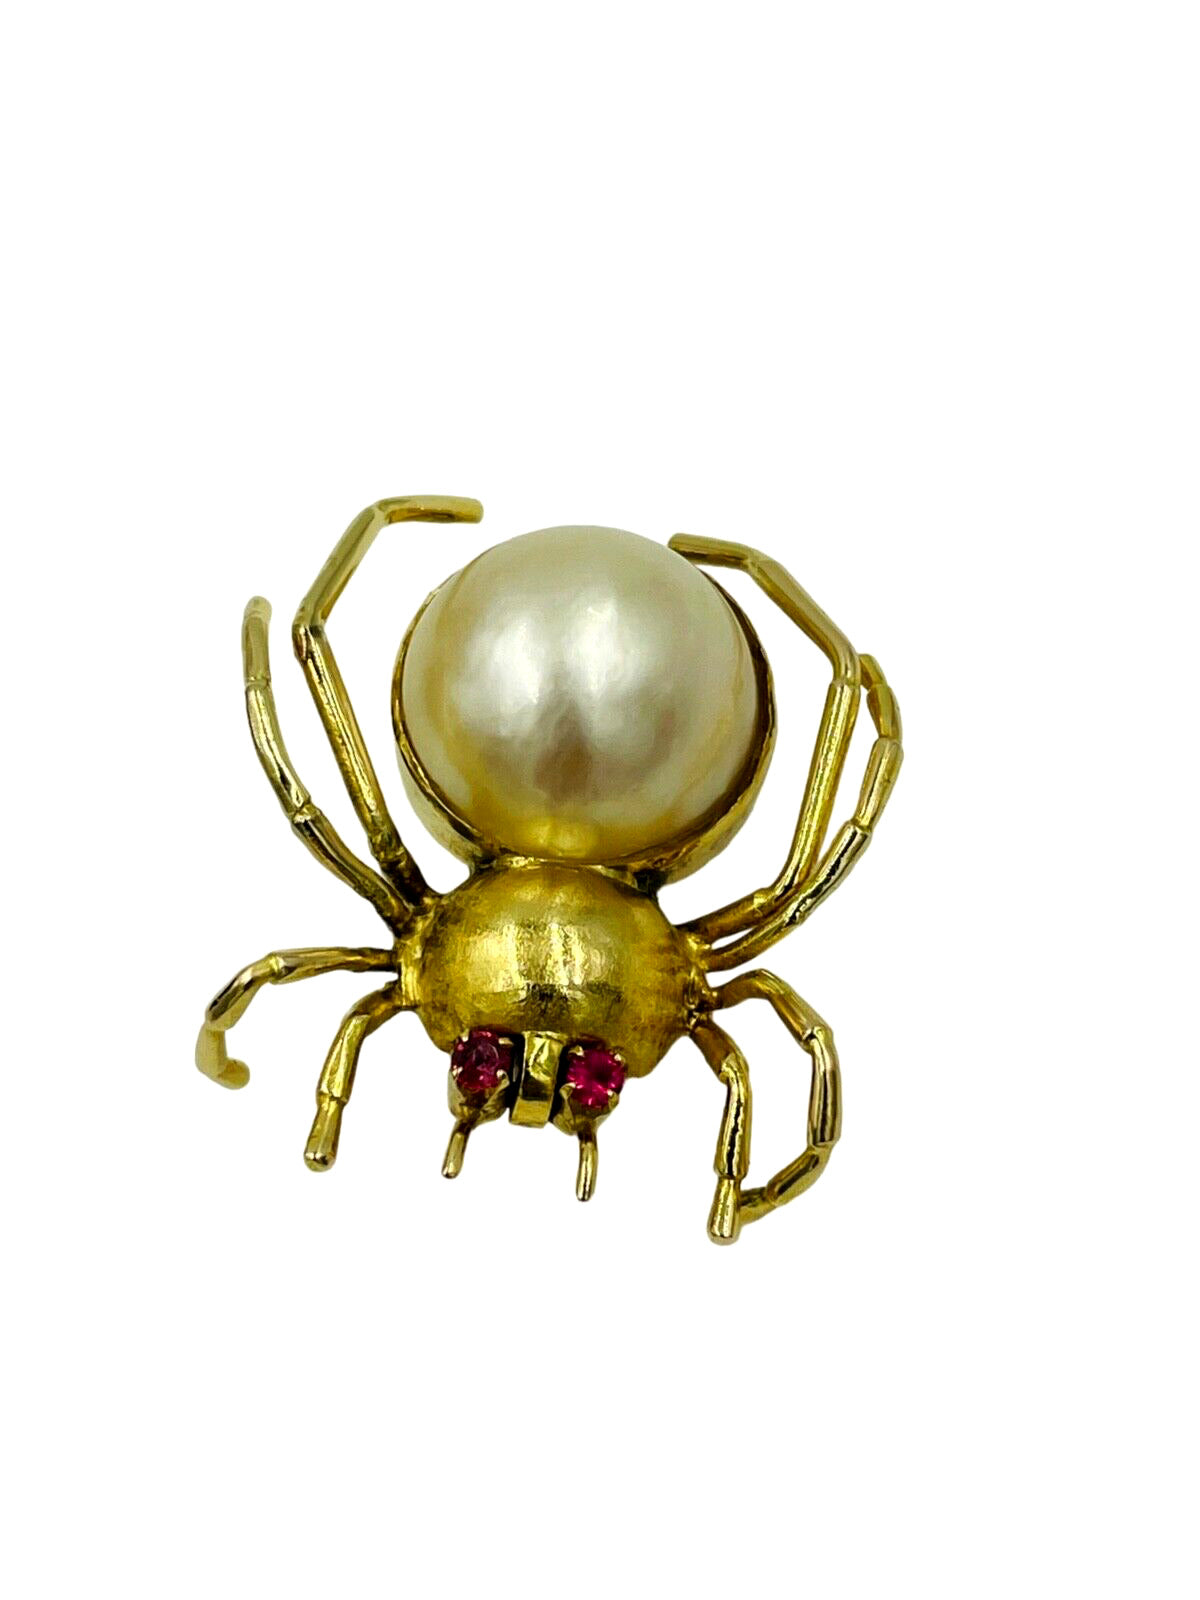 14K Yellow Gold Mabe Pearl & Ruby Spider Pin Brooch Vintage F Signed 9.8g